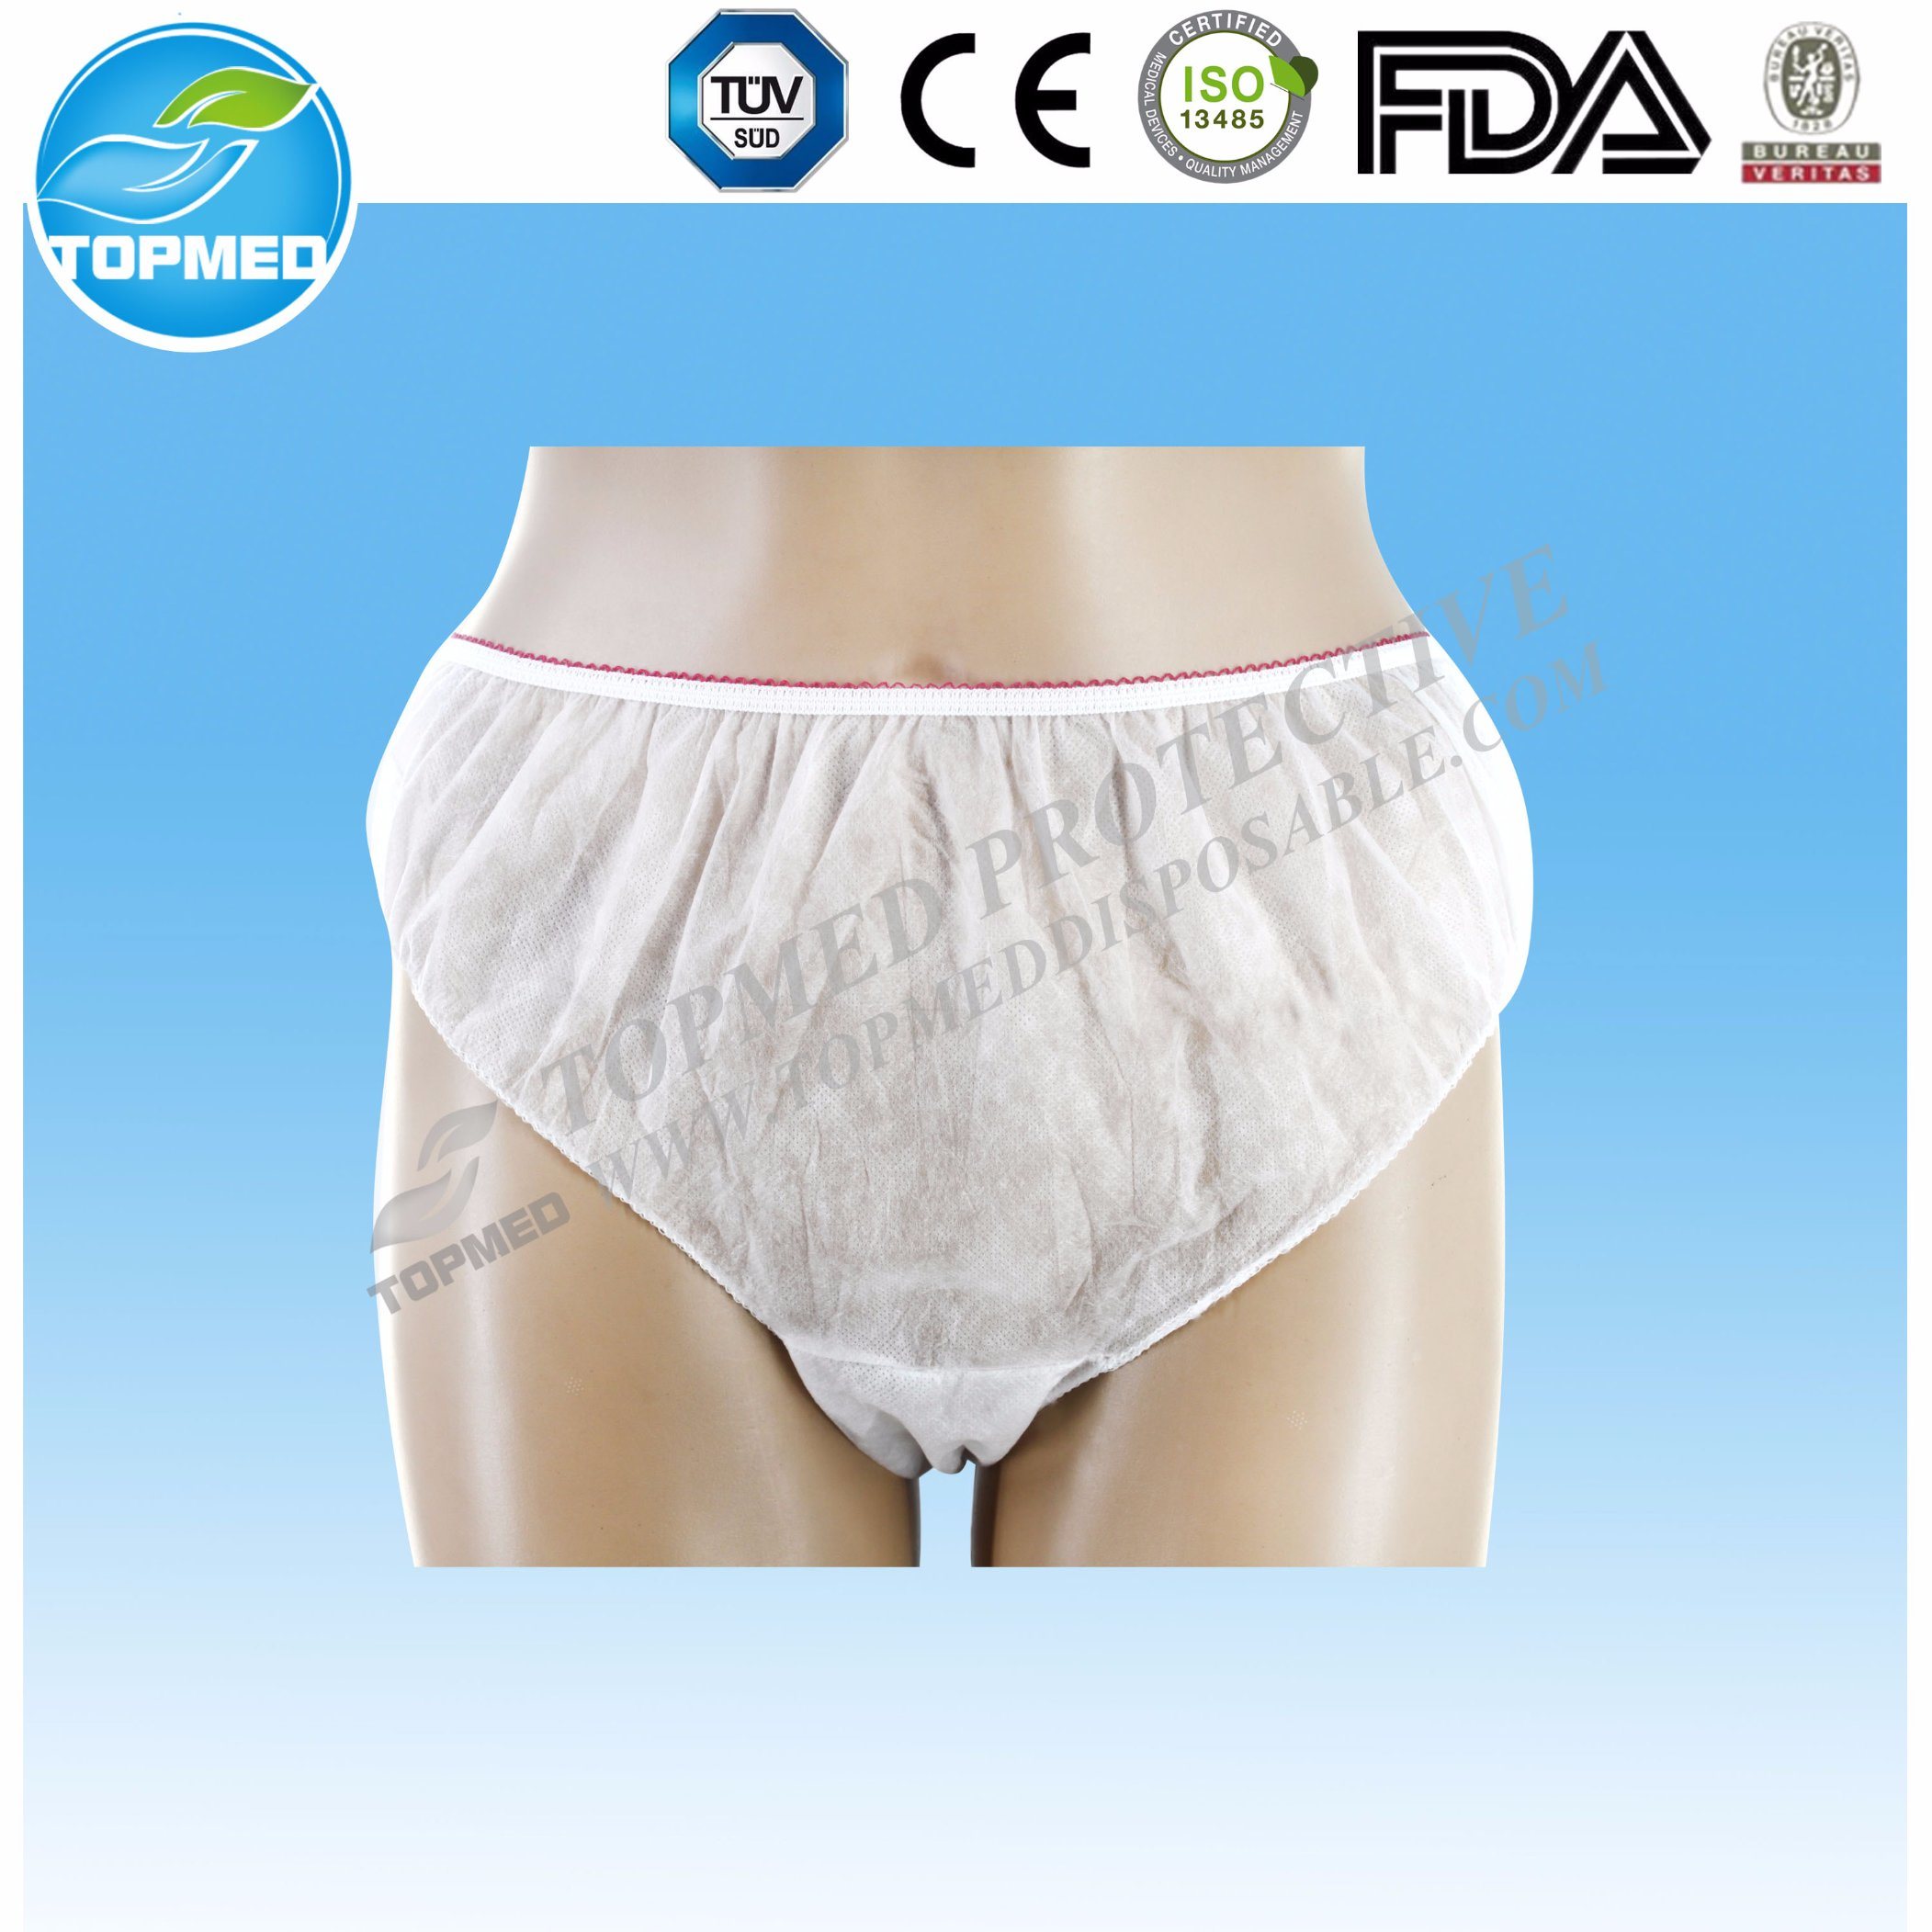 High Quality Disposable Underwear for Travel, SPA, Sauna